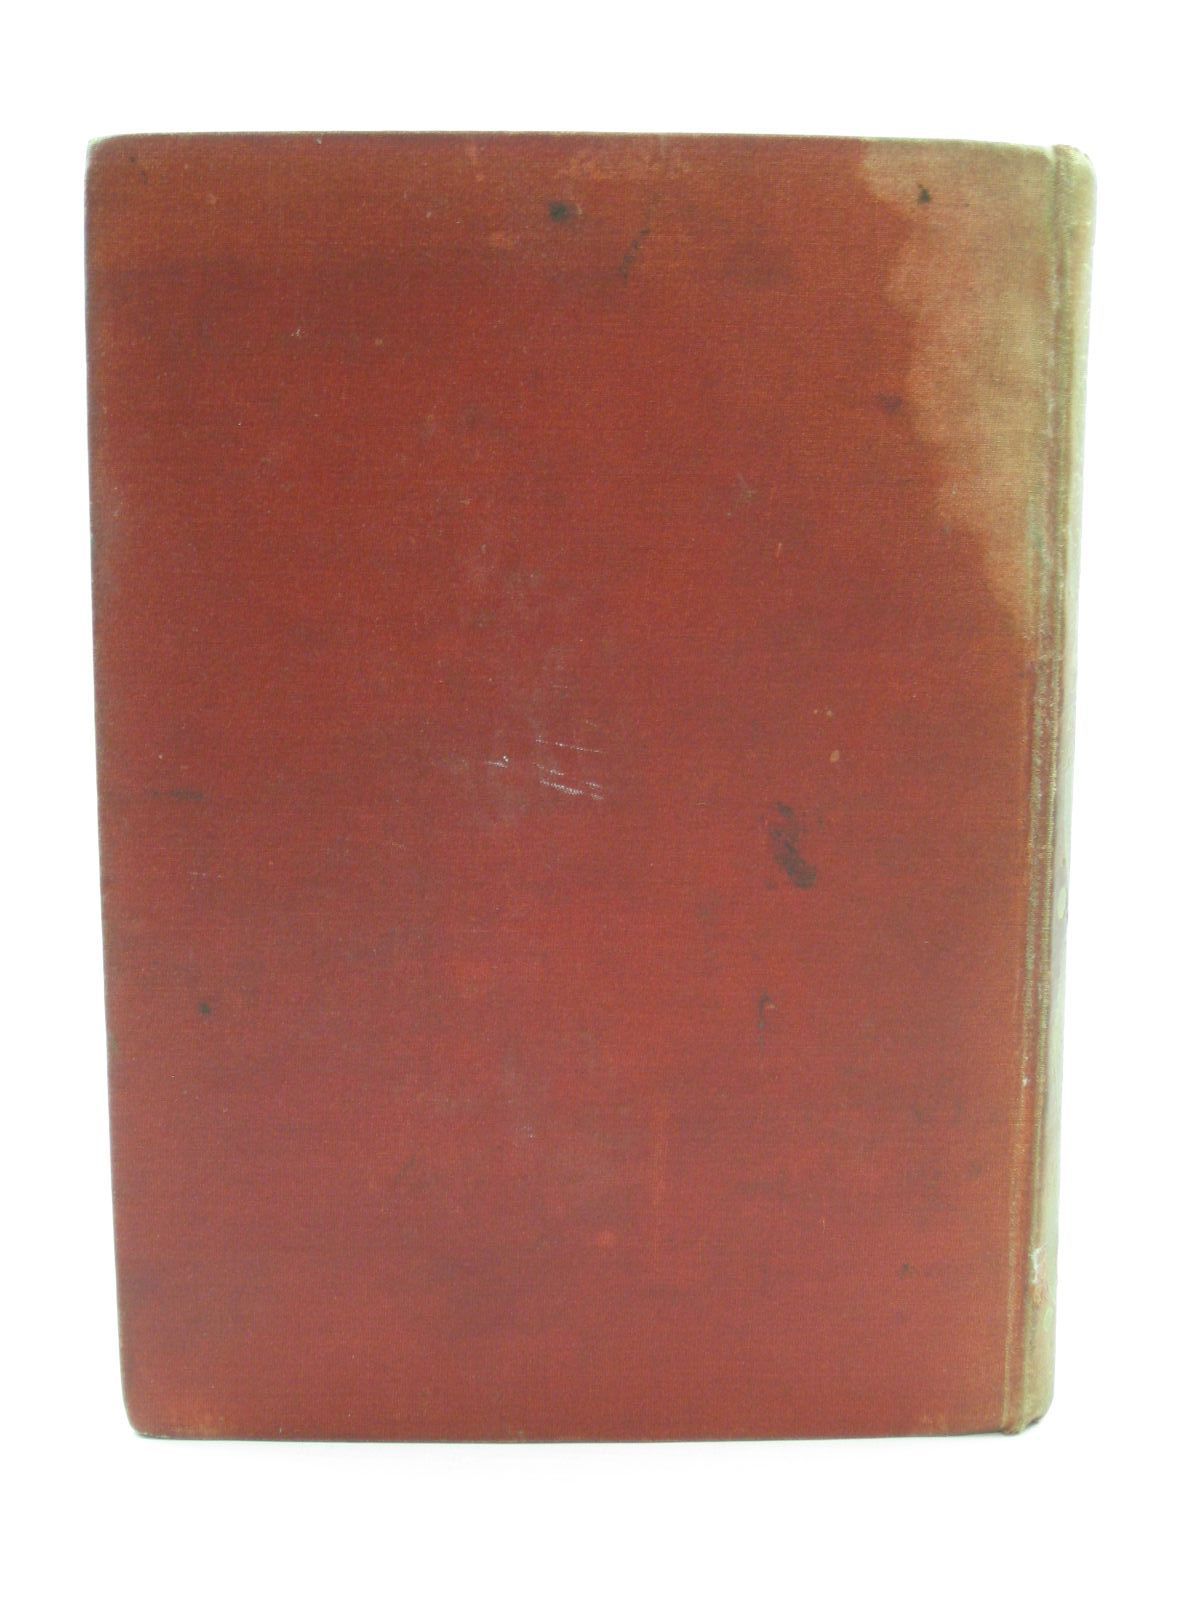 Photo of MARGARET'S BOOK written by Fielding-Hall, H.
Miles, Alfred H. illustrated by Robinson, Charles published by Hutchinson & Co. (STOCK CODE: 1507454)  for sale by Stella & Rose's Books